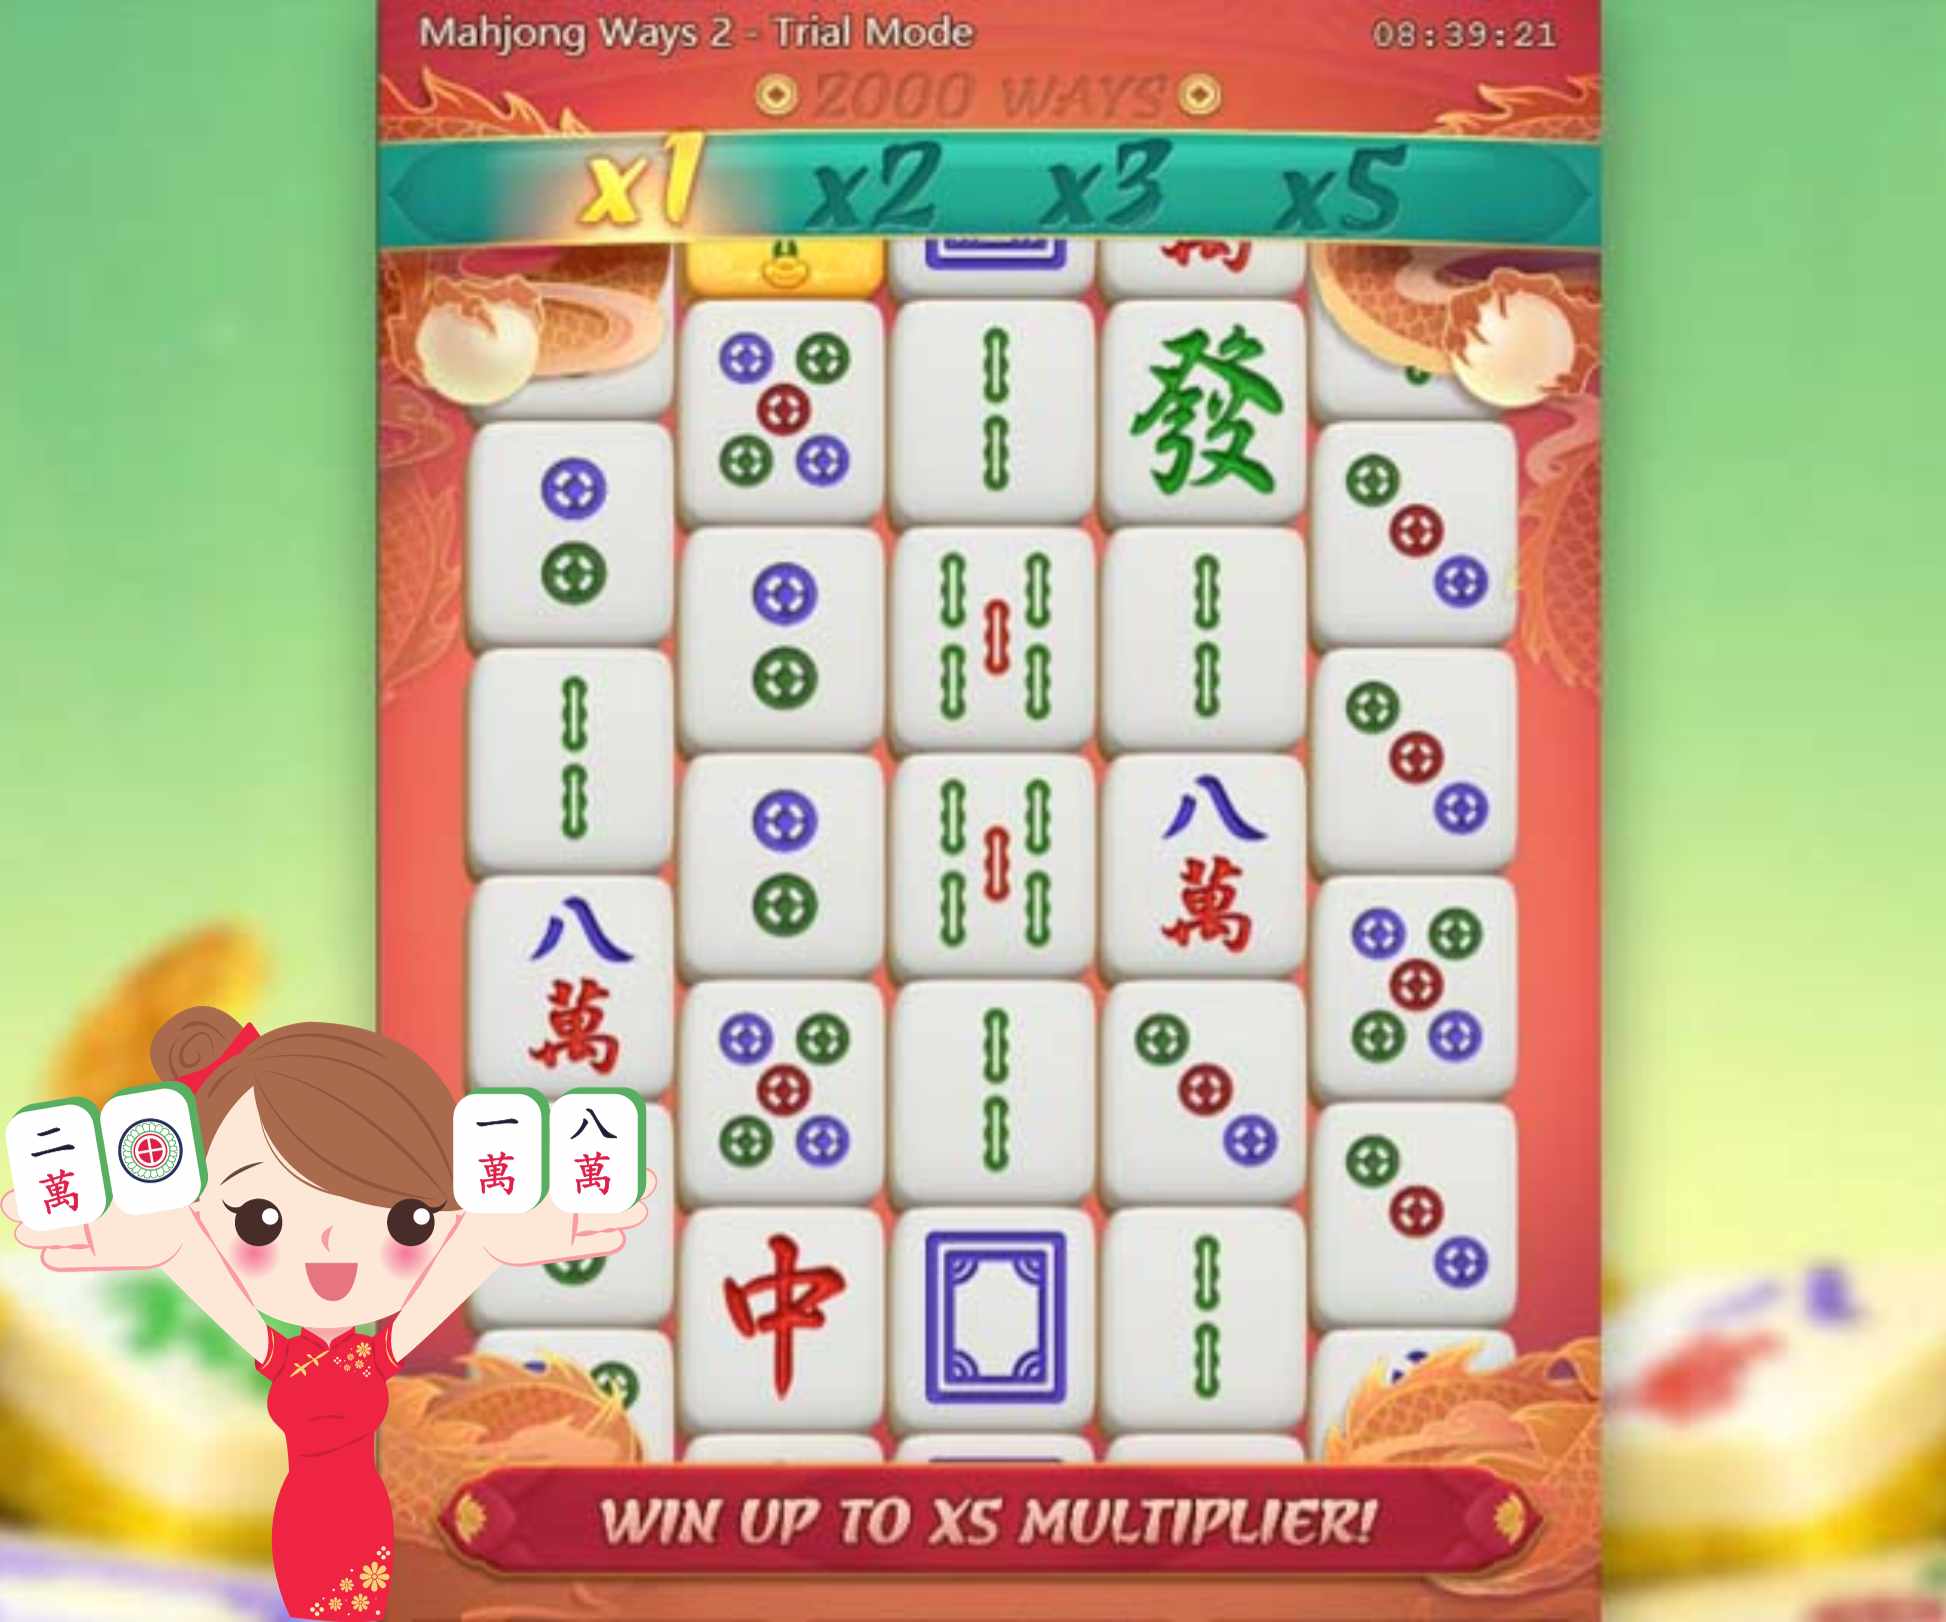 You have to try the Mahjong Ways 2 slot game